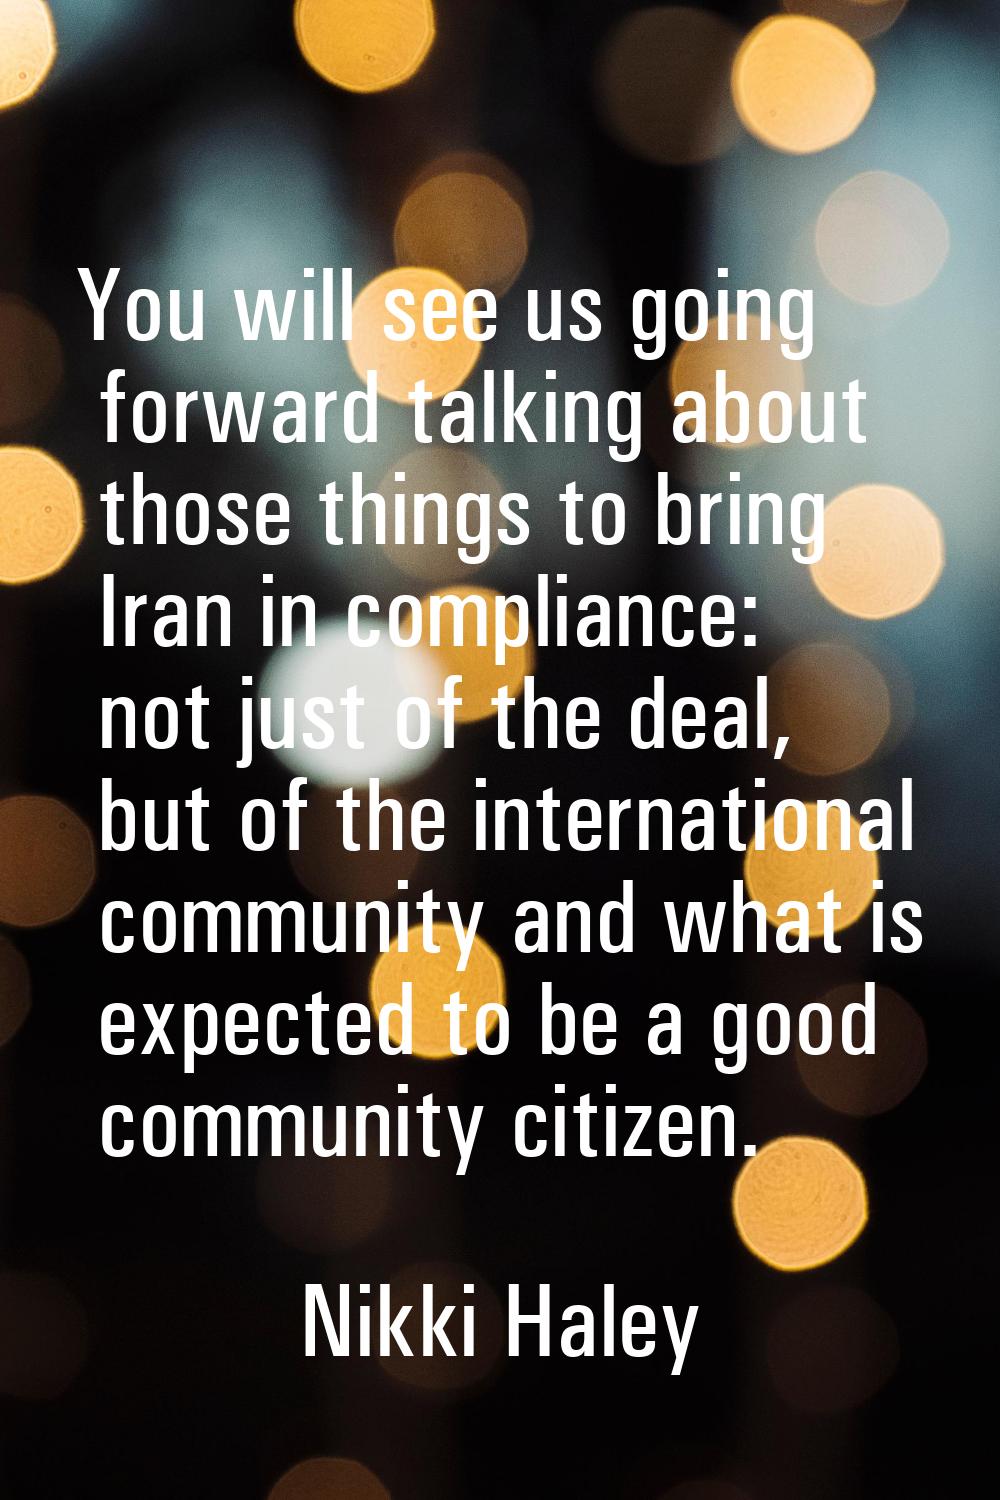 You will see us going forward talking about those things to bring Iran in compliance: not just of t